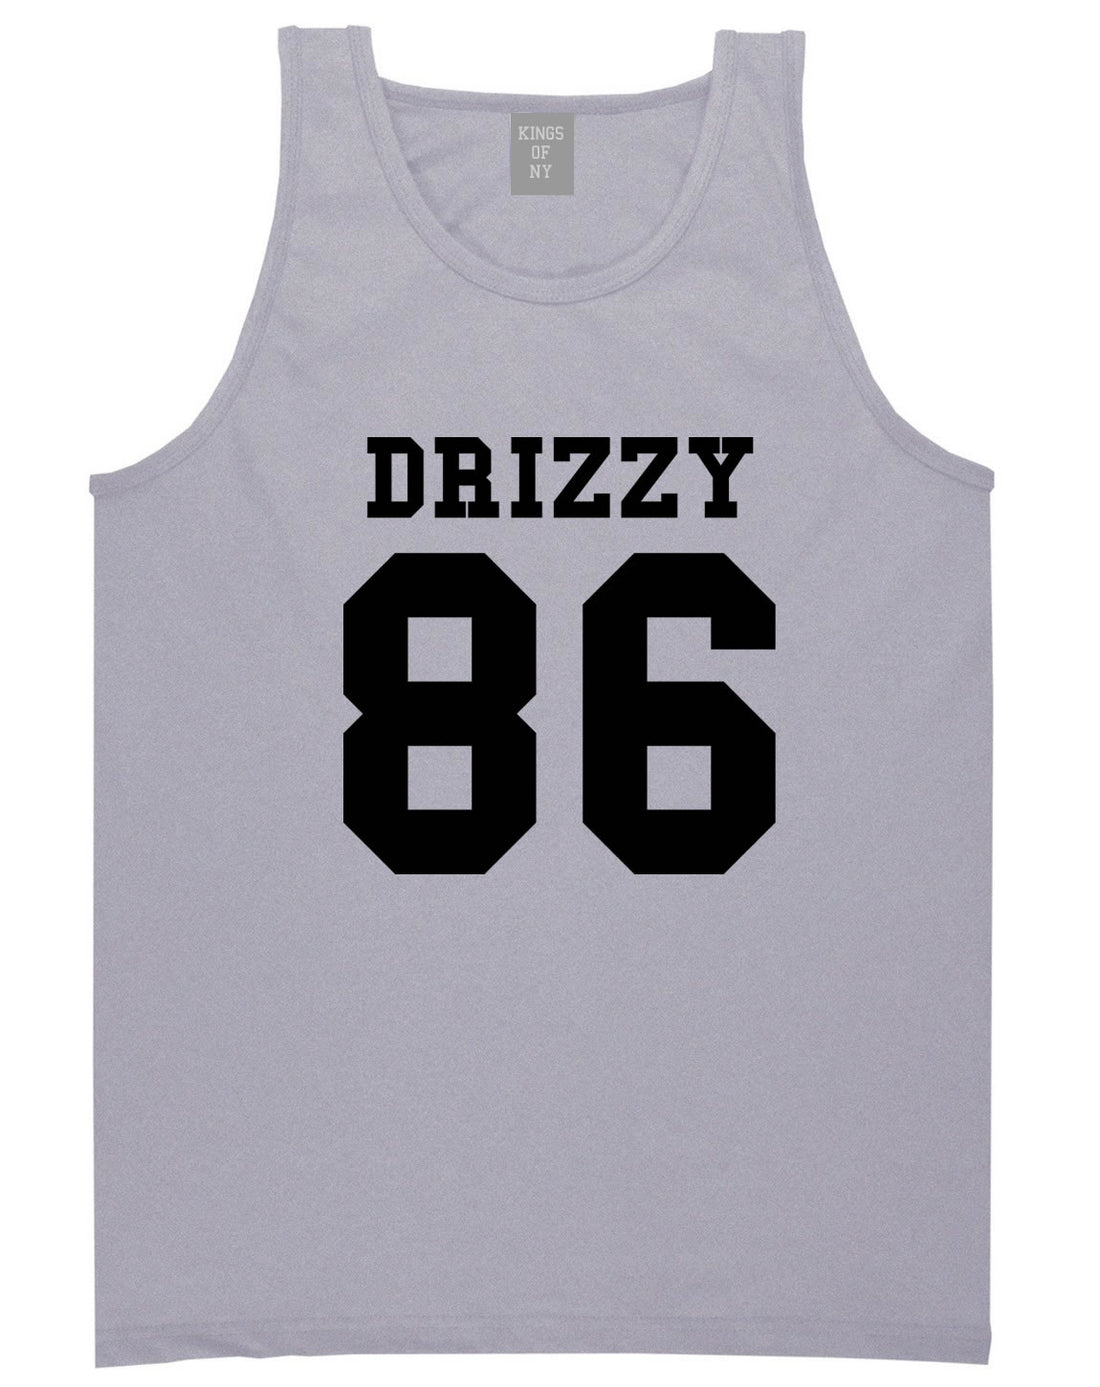 Drizzy 86 Team Jersey Tank Top in Grey by Kings Of NY